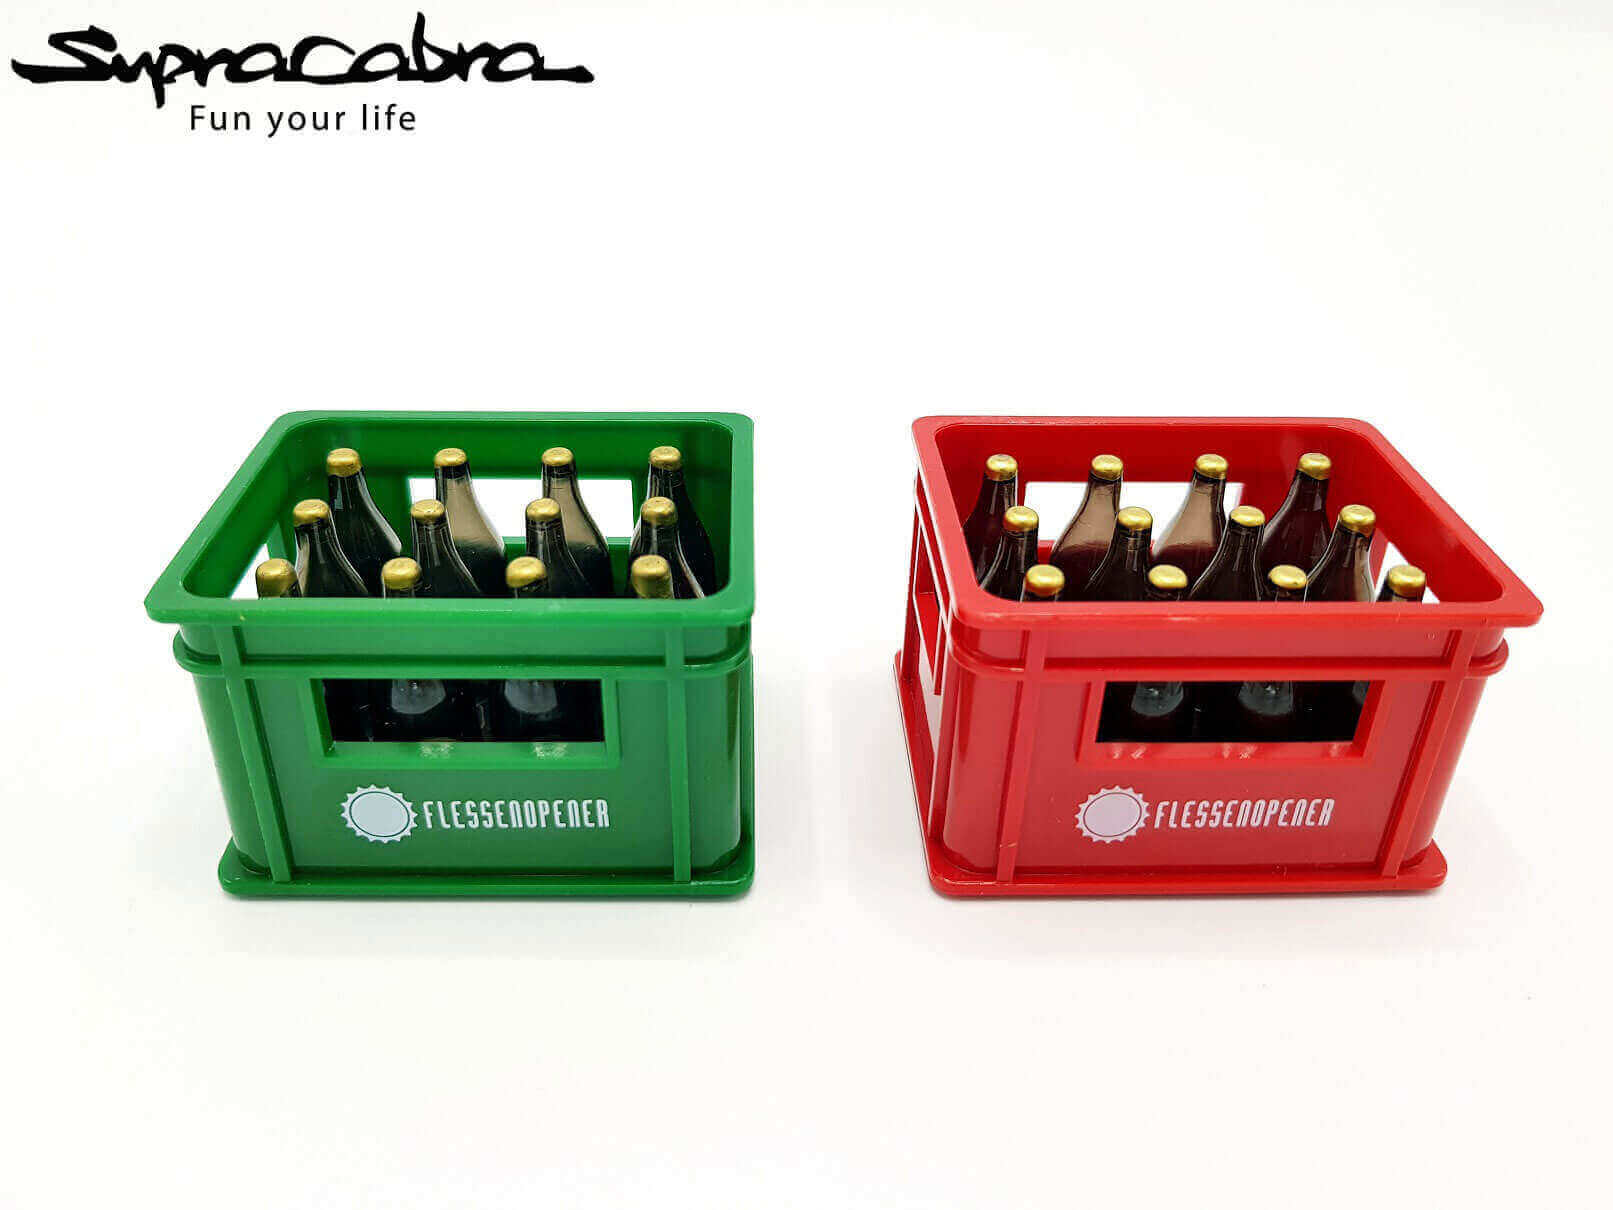 https://supracabra.com/wp-content/uploads/2018/06/Crate-Of-Beer-Bottle-Opener-Red-or-Green-by-Supracabra.com-Fun-your-life.jpg